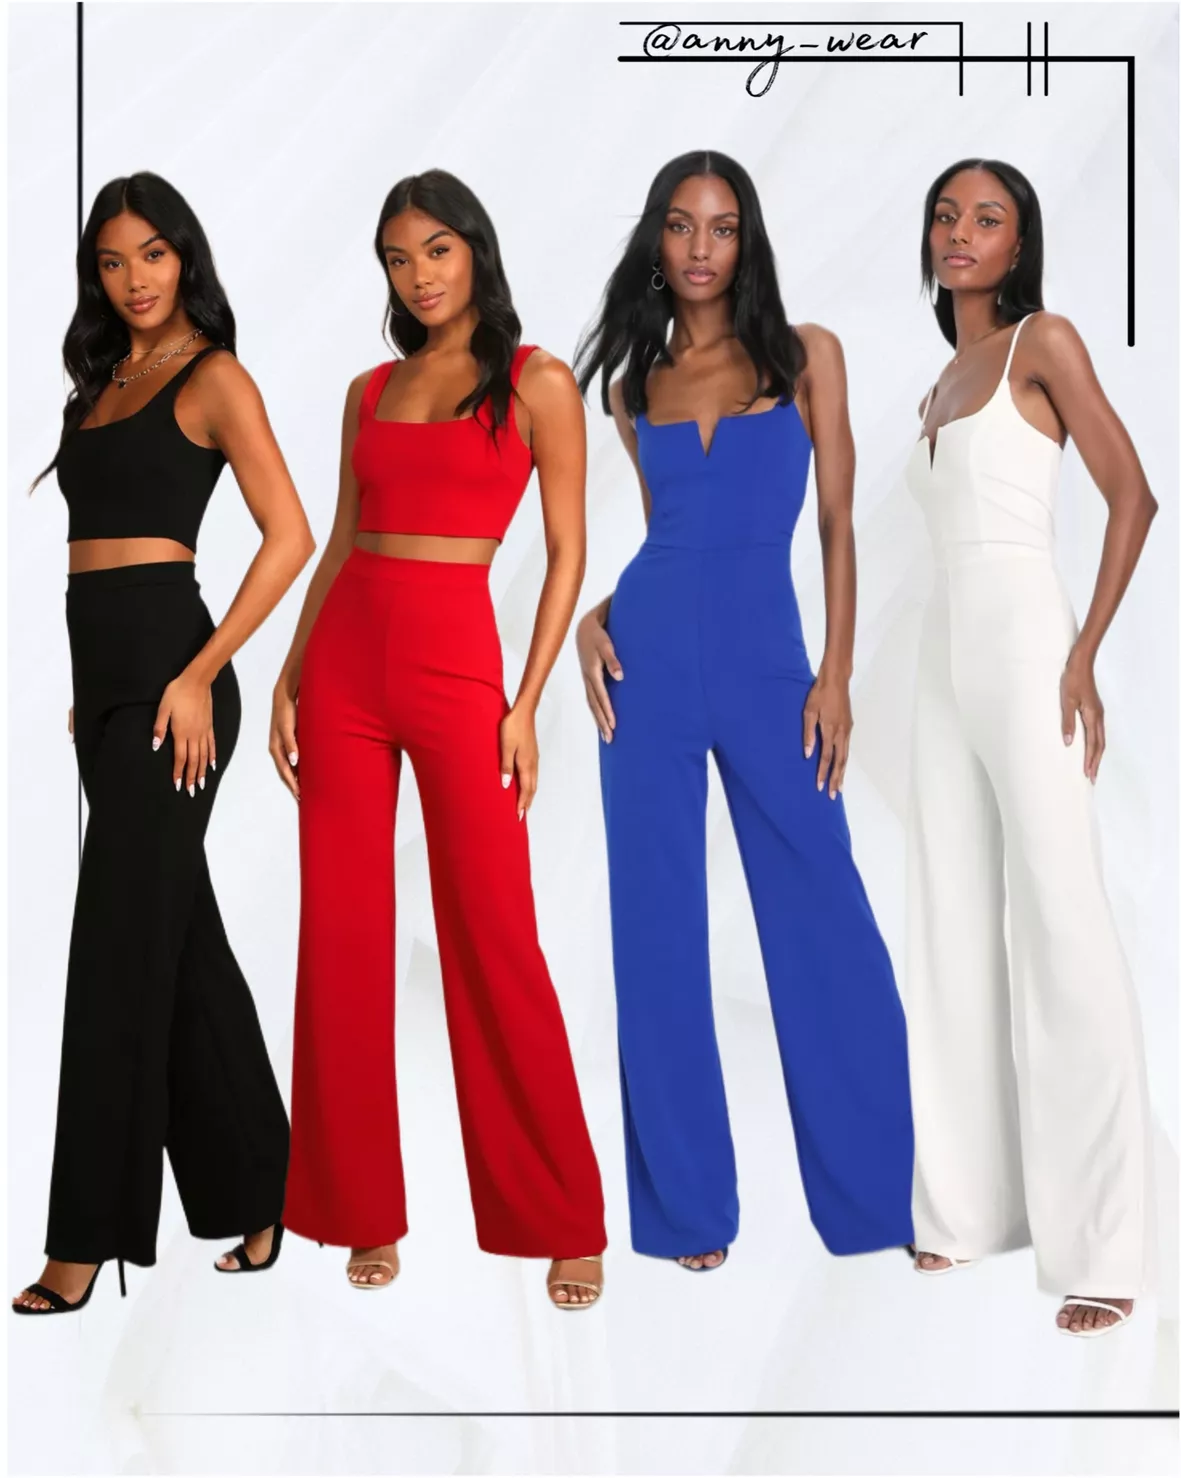 Red Jumpsuits for Women - Lulus